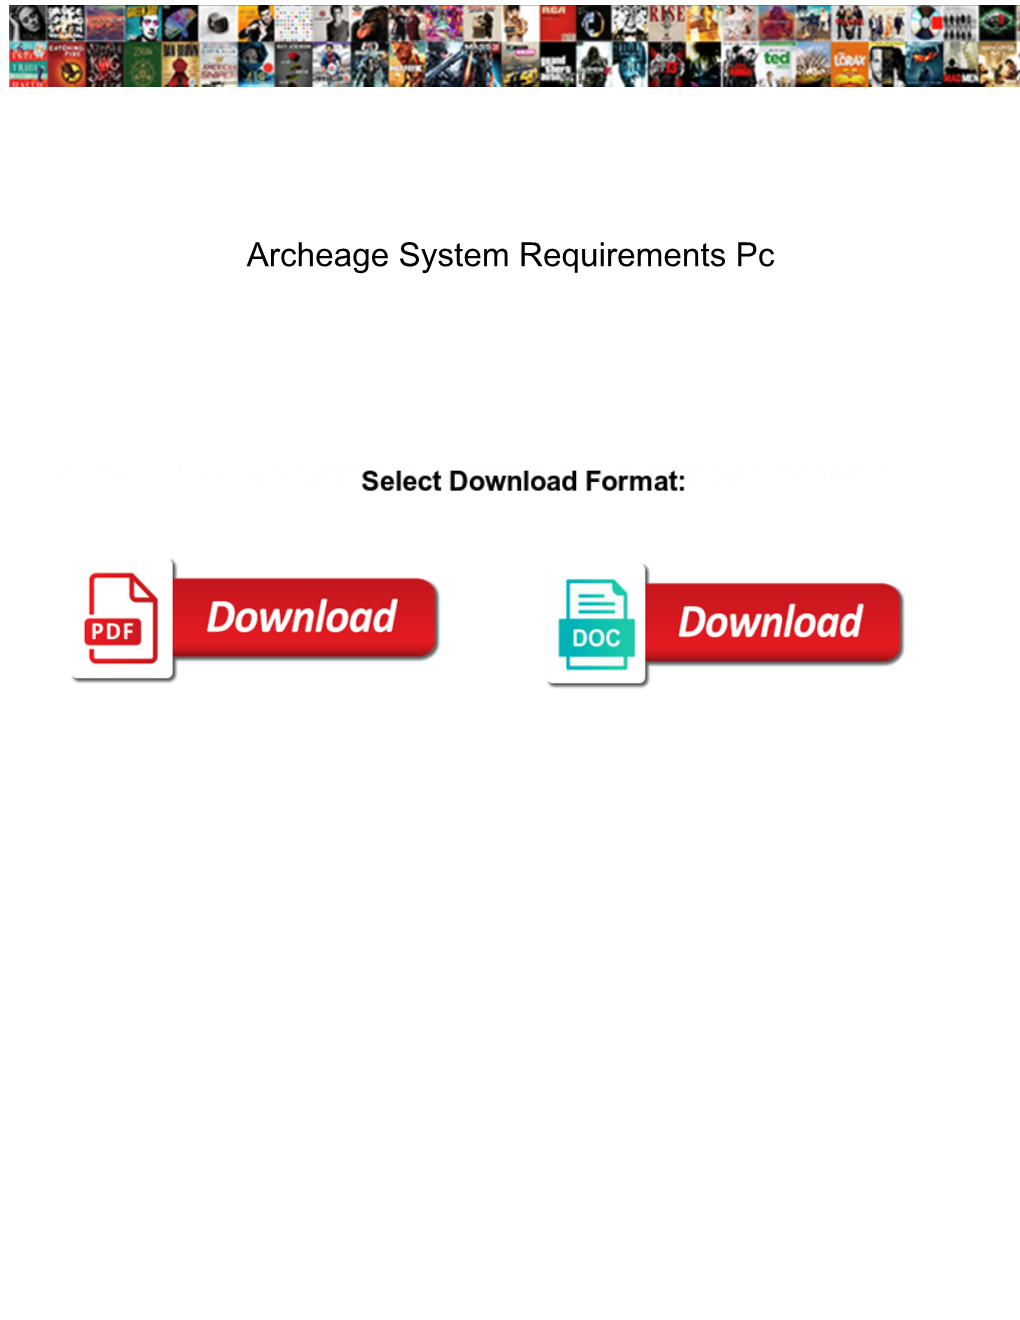 Archeage System Requirements Pc